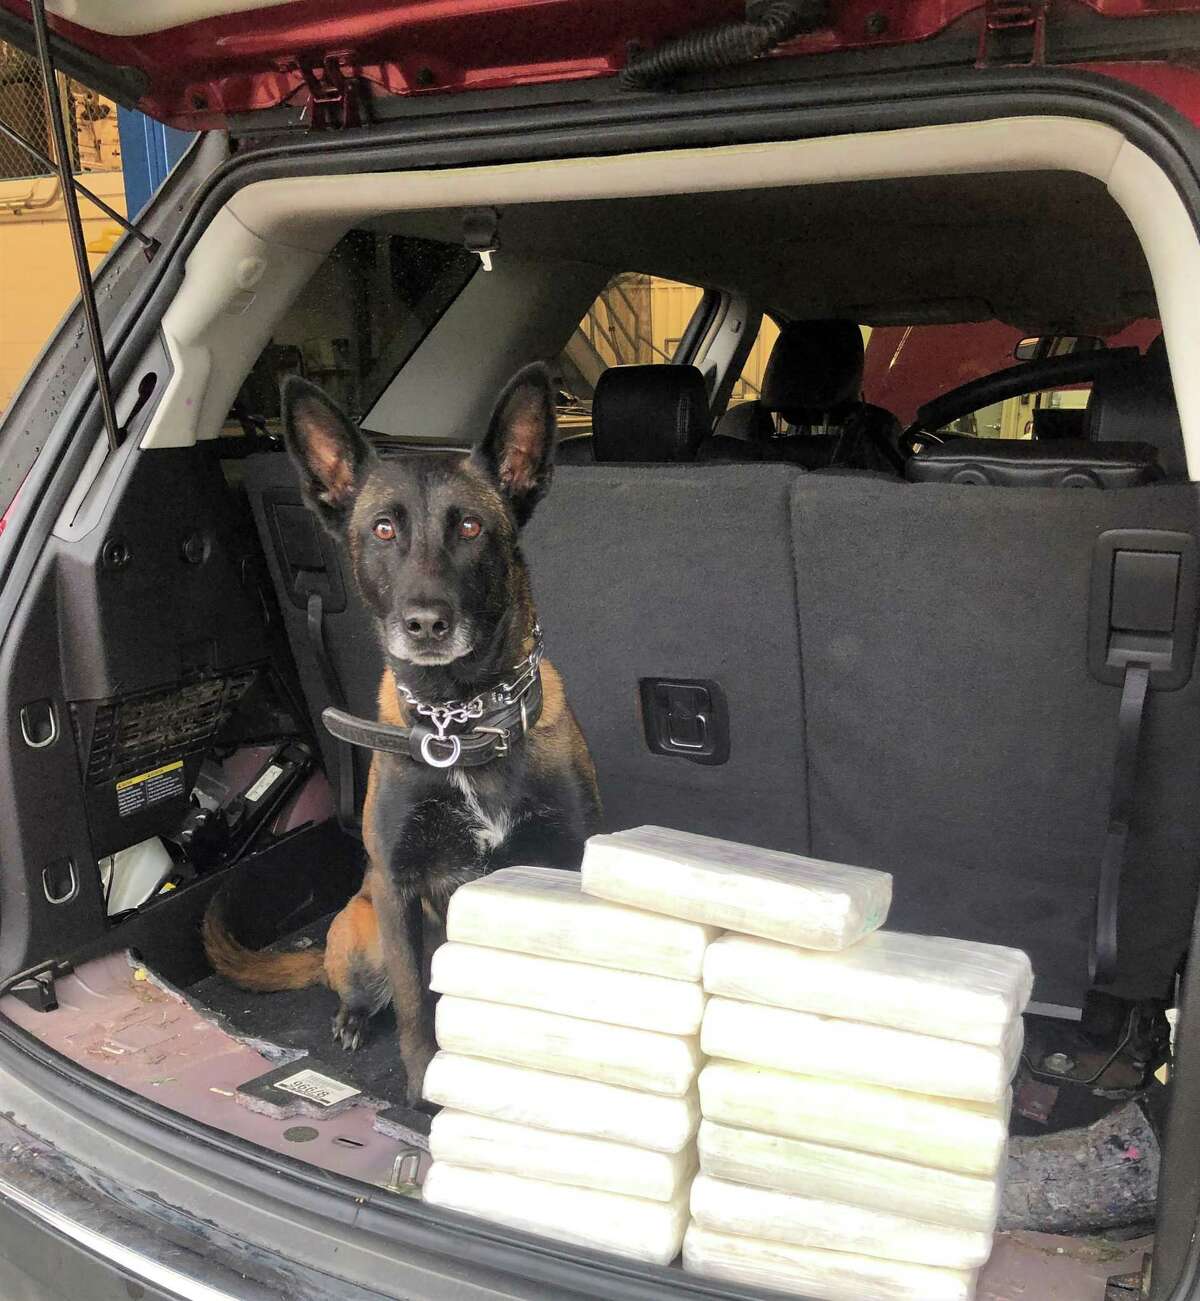 On Thursday, Feb. 28, 2019, a Fort Bend County Sheriff's Office interdiction K-9 team conducted a traffic stop on U.S. 59 northbound near Rosenberg. During the stop, cocaine with a street value estimated at more than $700,000 was recovered.